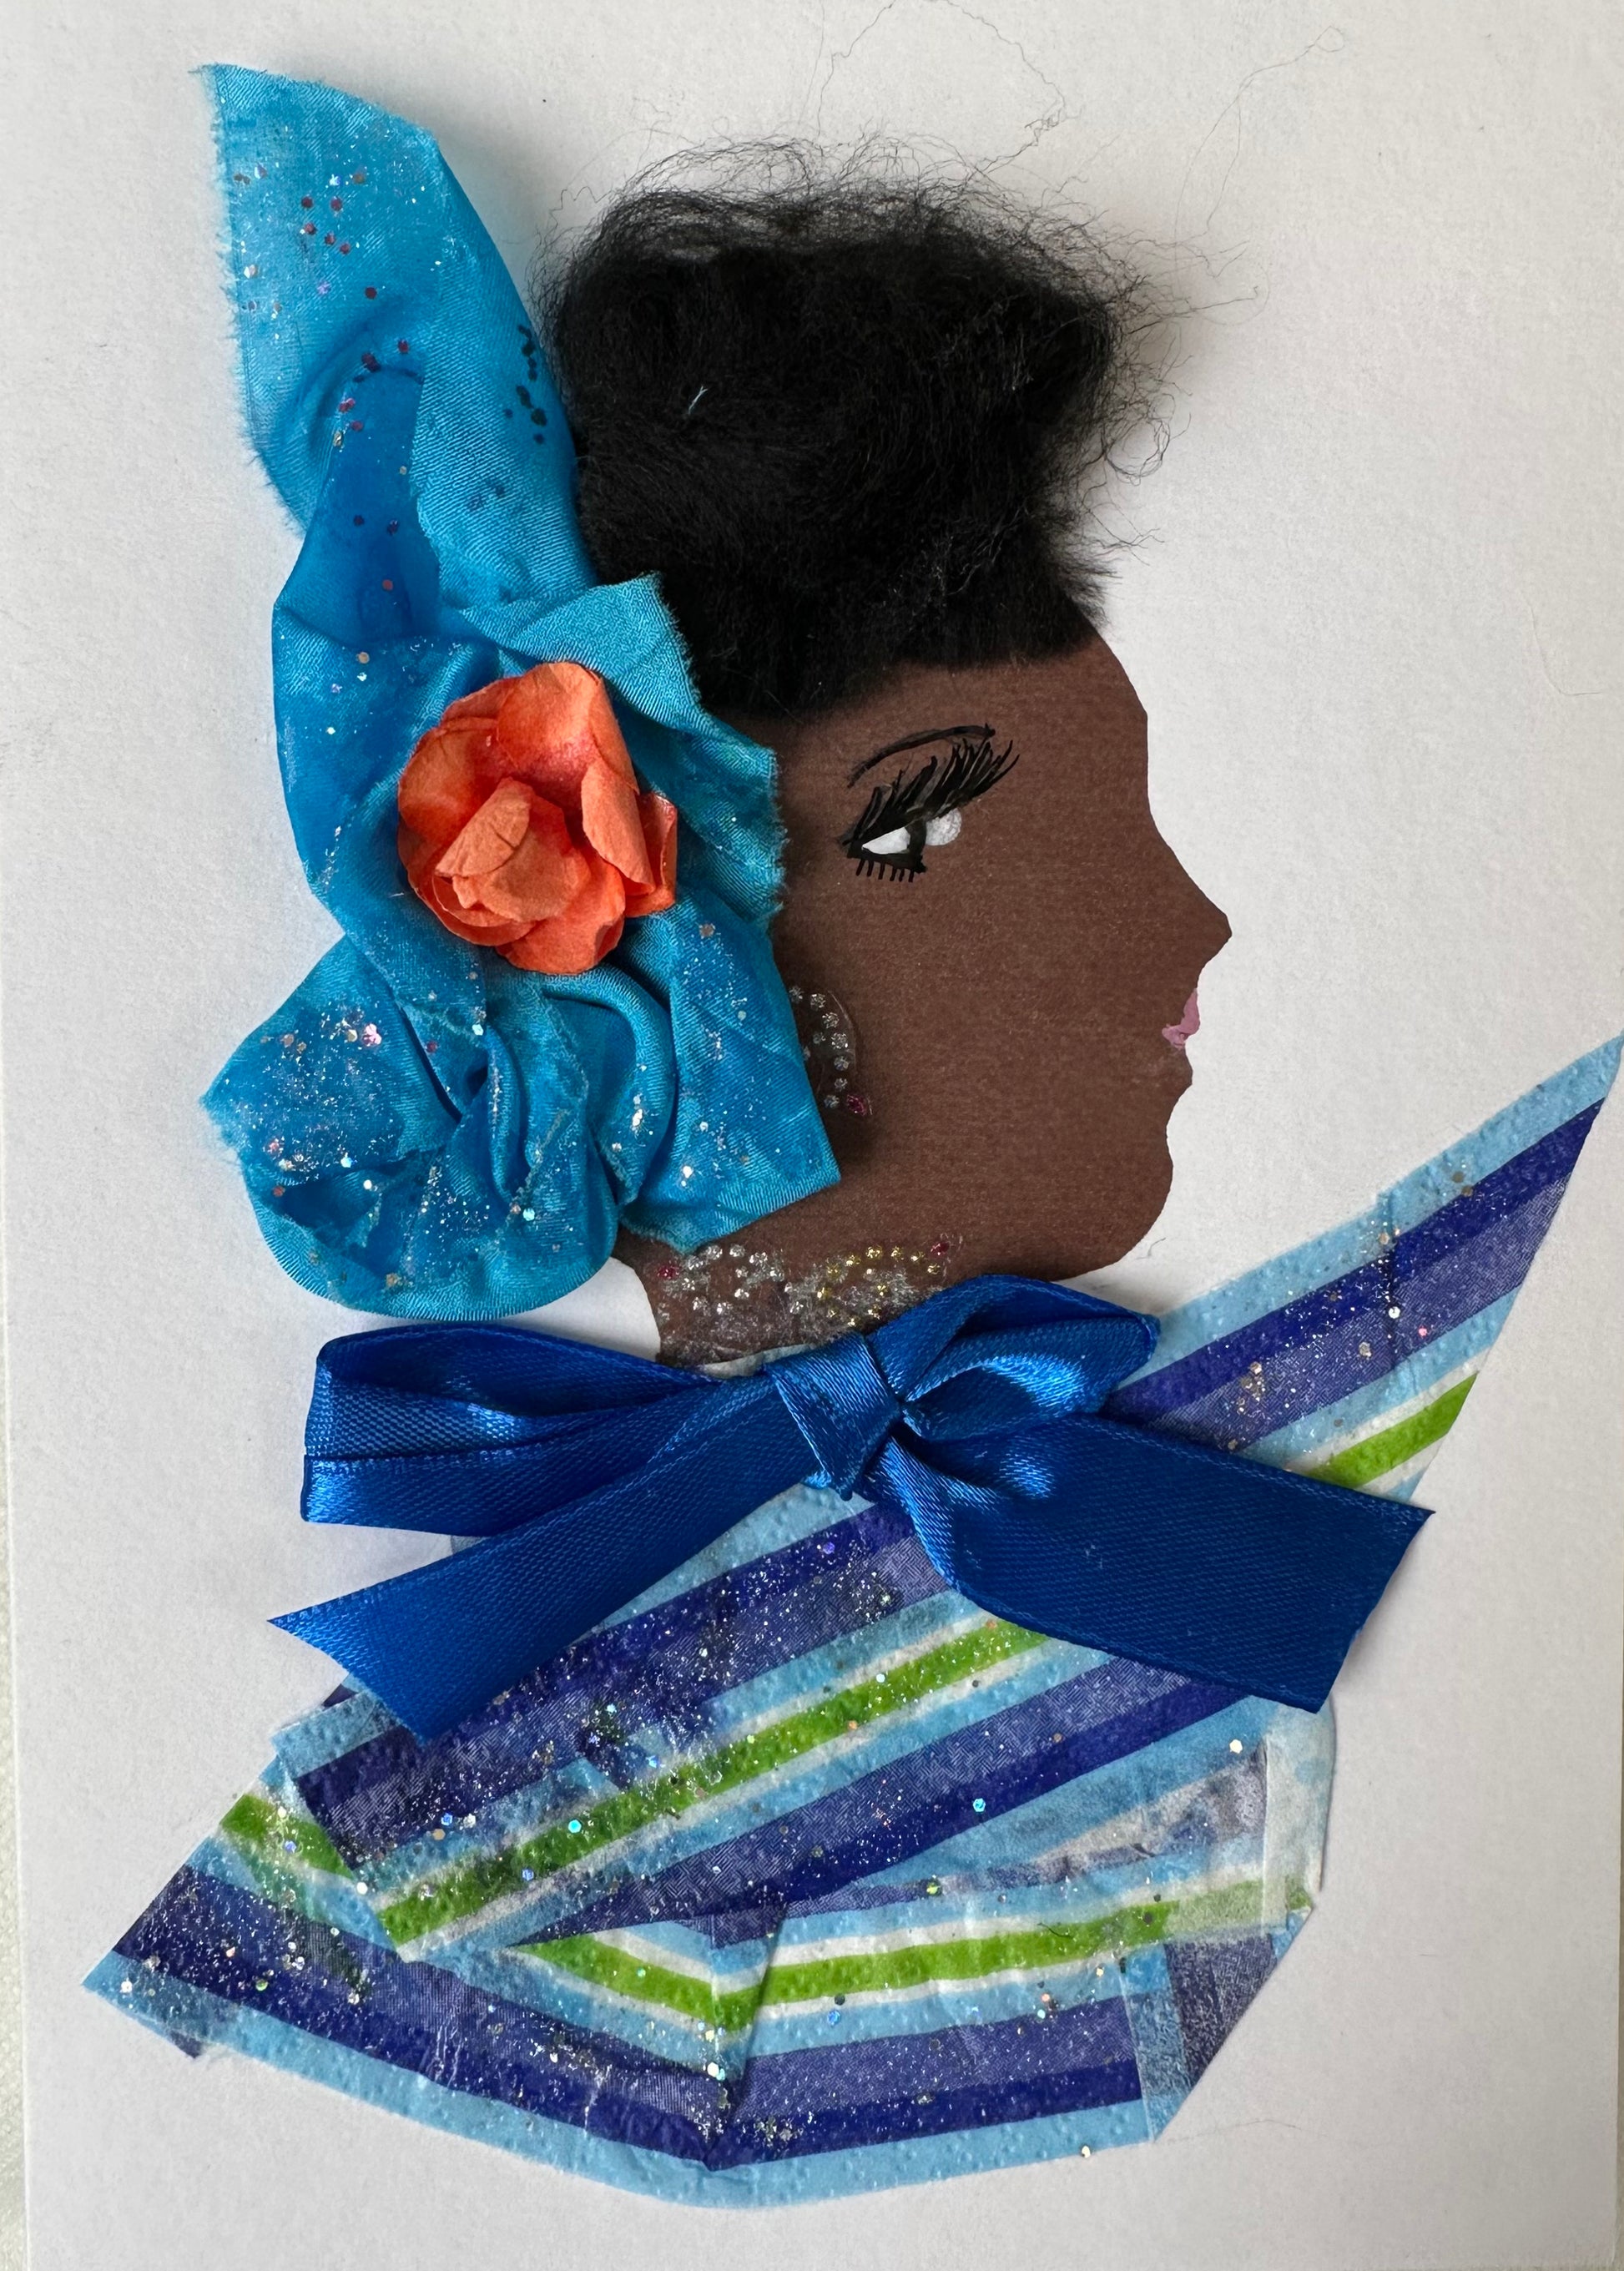 This handmade card of Wimbledon Welma is of a woman wearing a blue and green stripped blouse with a royal blue bow on her neck. She has an ocean blue hair piece with a salmon coloured flower in the middle. Her look is completed with a thin, diamond-like necklace and earrings. 